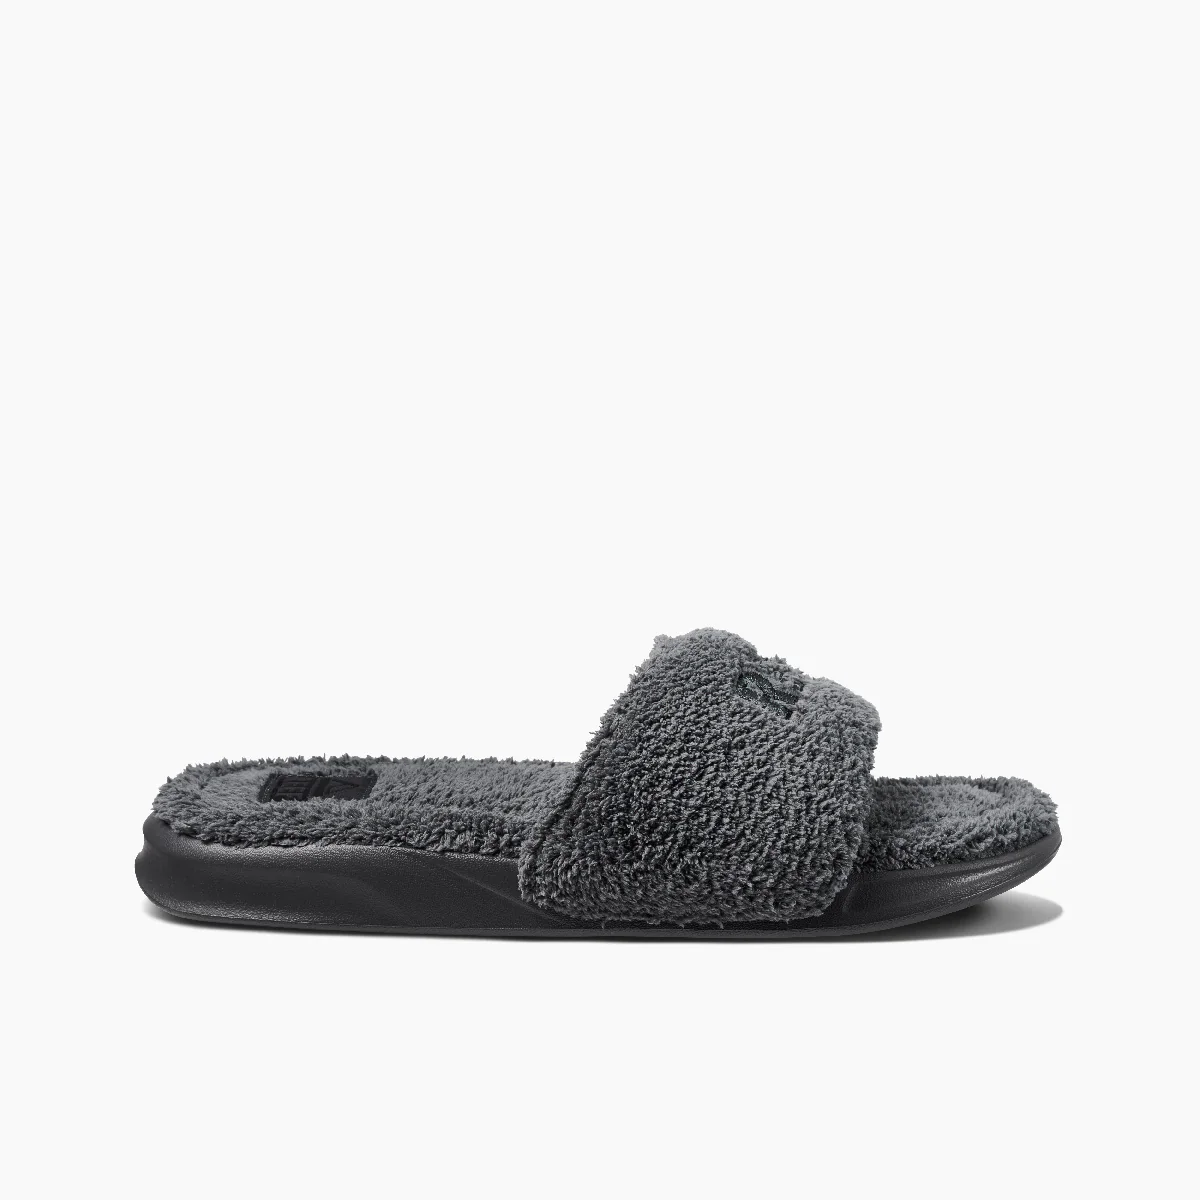 reef grey fuzzy slippers for the house side view